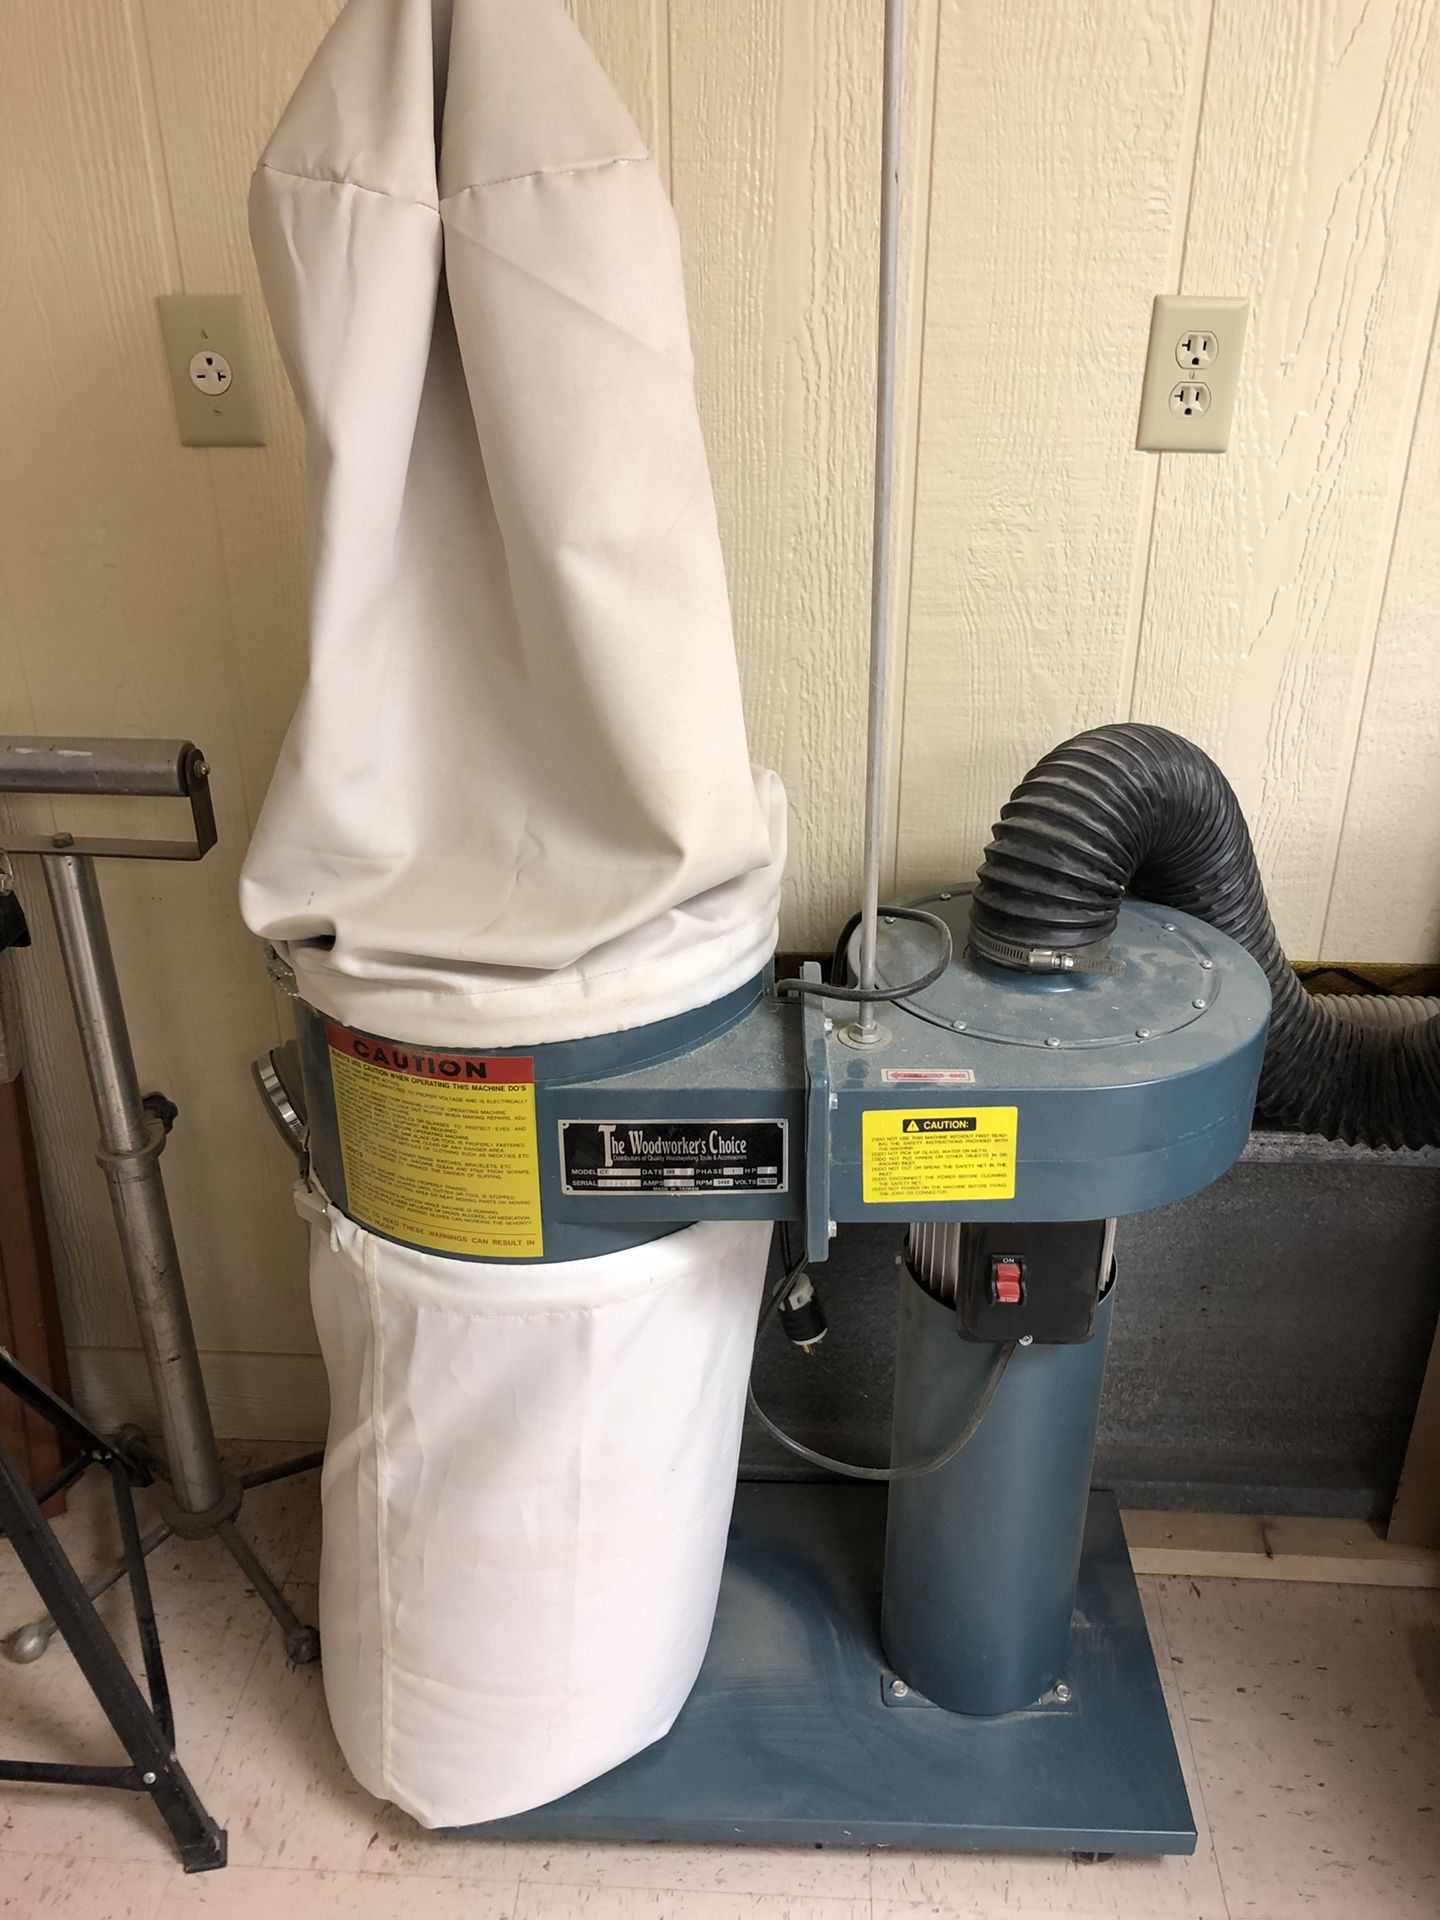 Woodworkers Choice dust collector